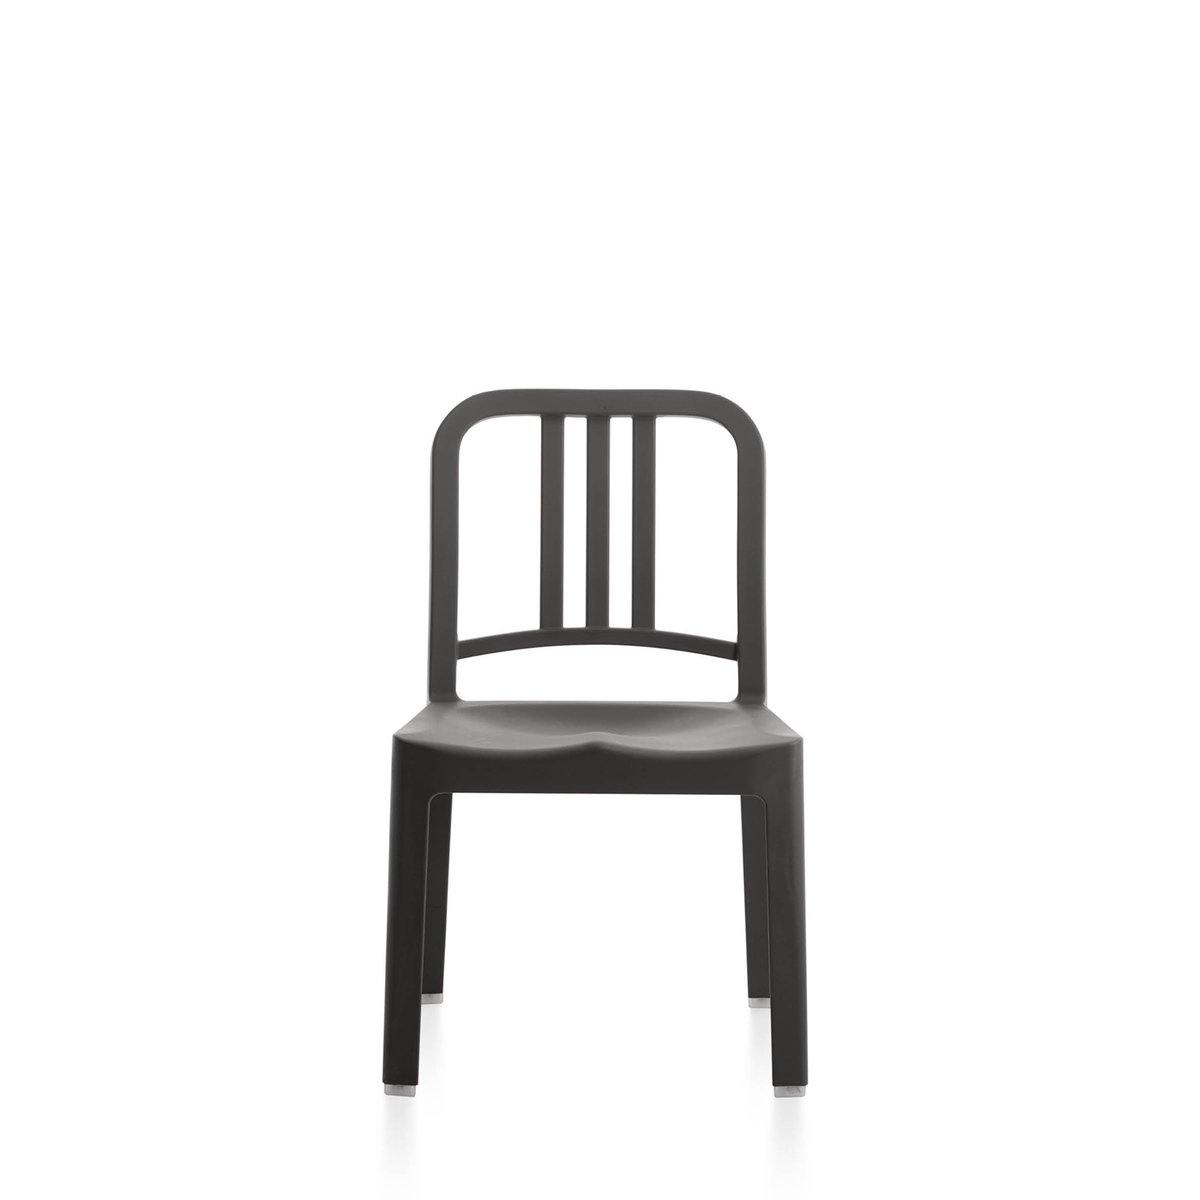 Navy Mini Chair 111 by Emeco in Recycled Plastic - Rarify Inc.